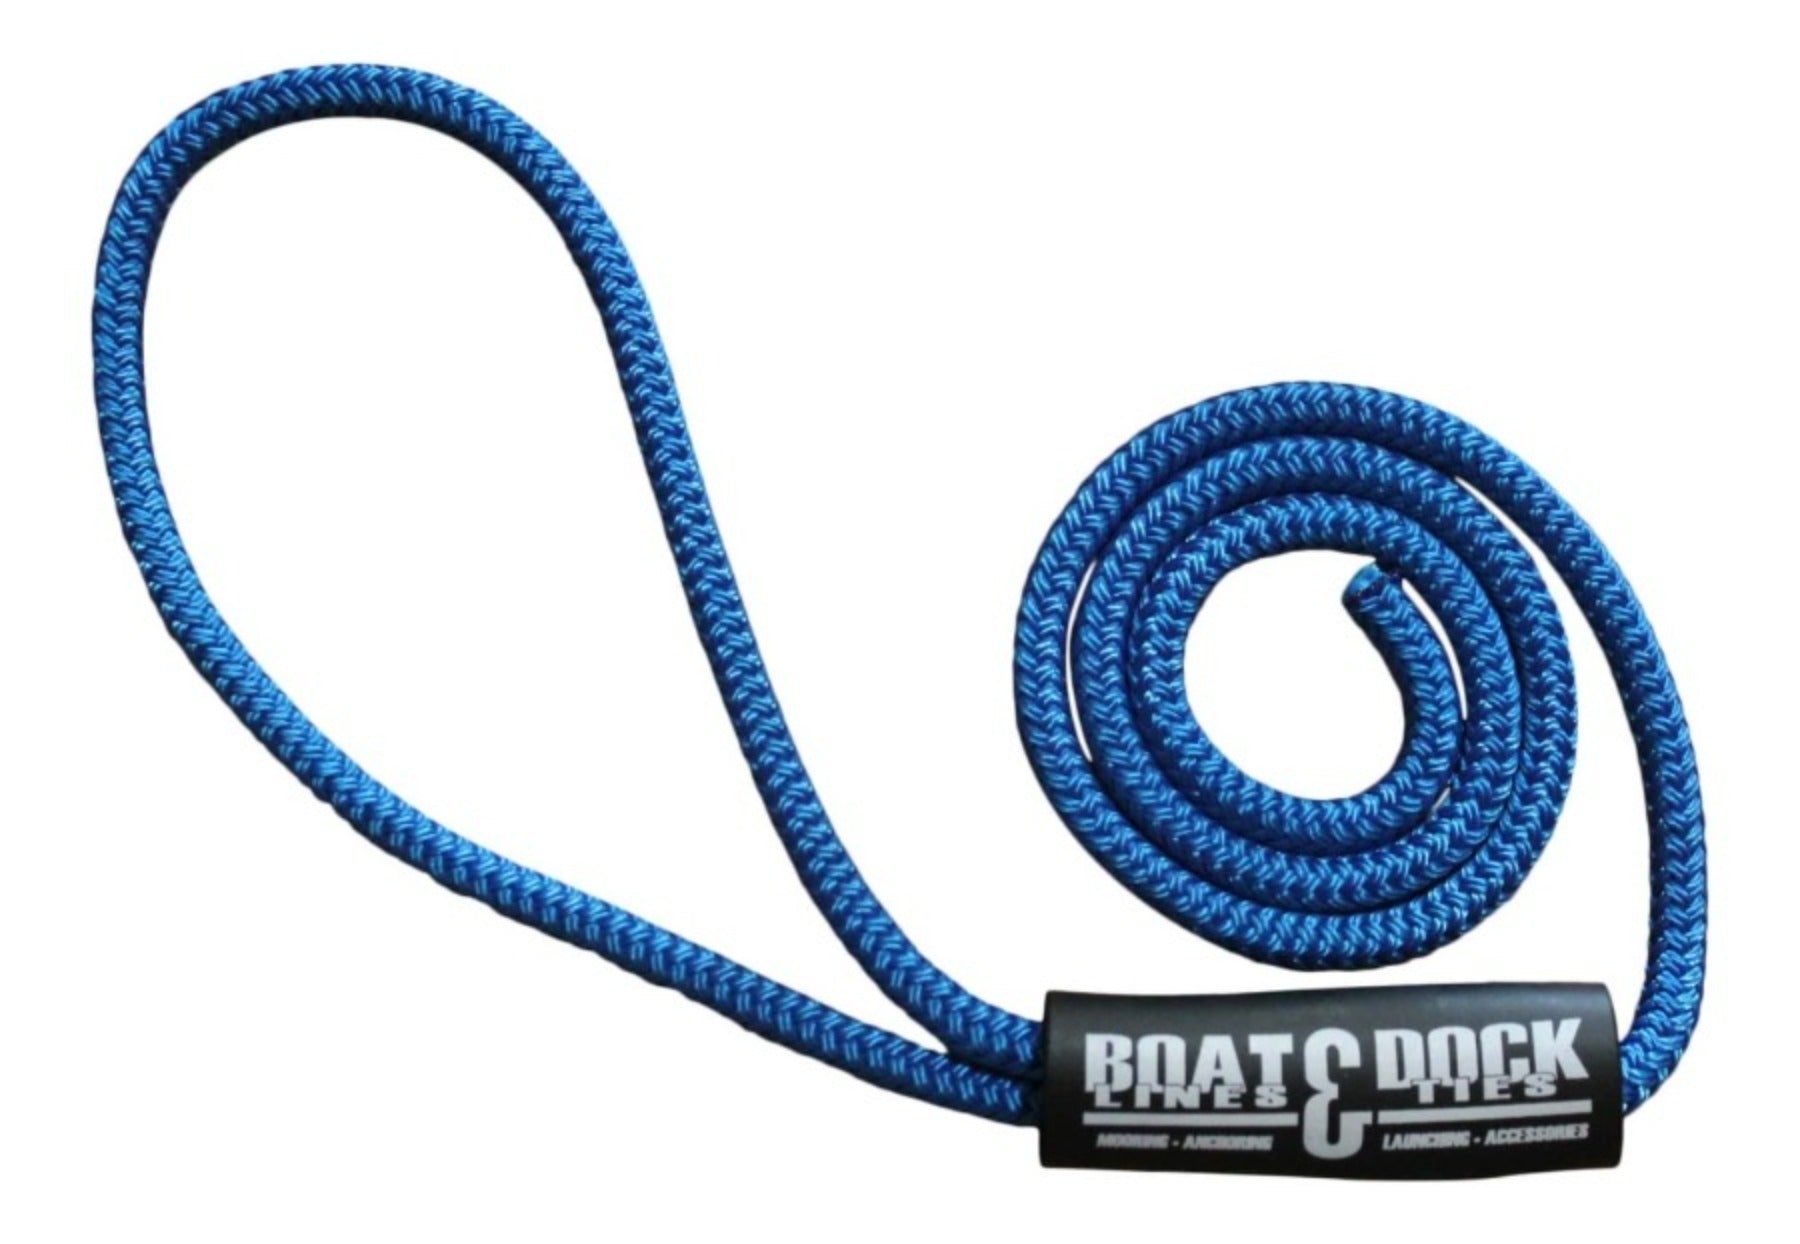 Boat Dock Fender Line - Premium Double Braided Nylon Rope, Made in USA- 2 pack - Boat Lines & Dock Ties Boat Lines & Dock Ties 4 Feet / Royal Blue